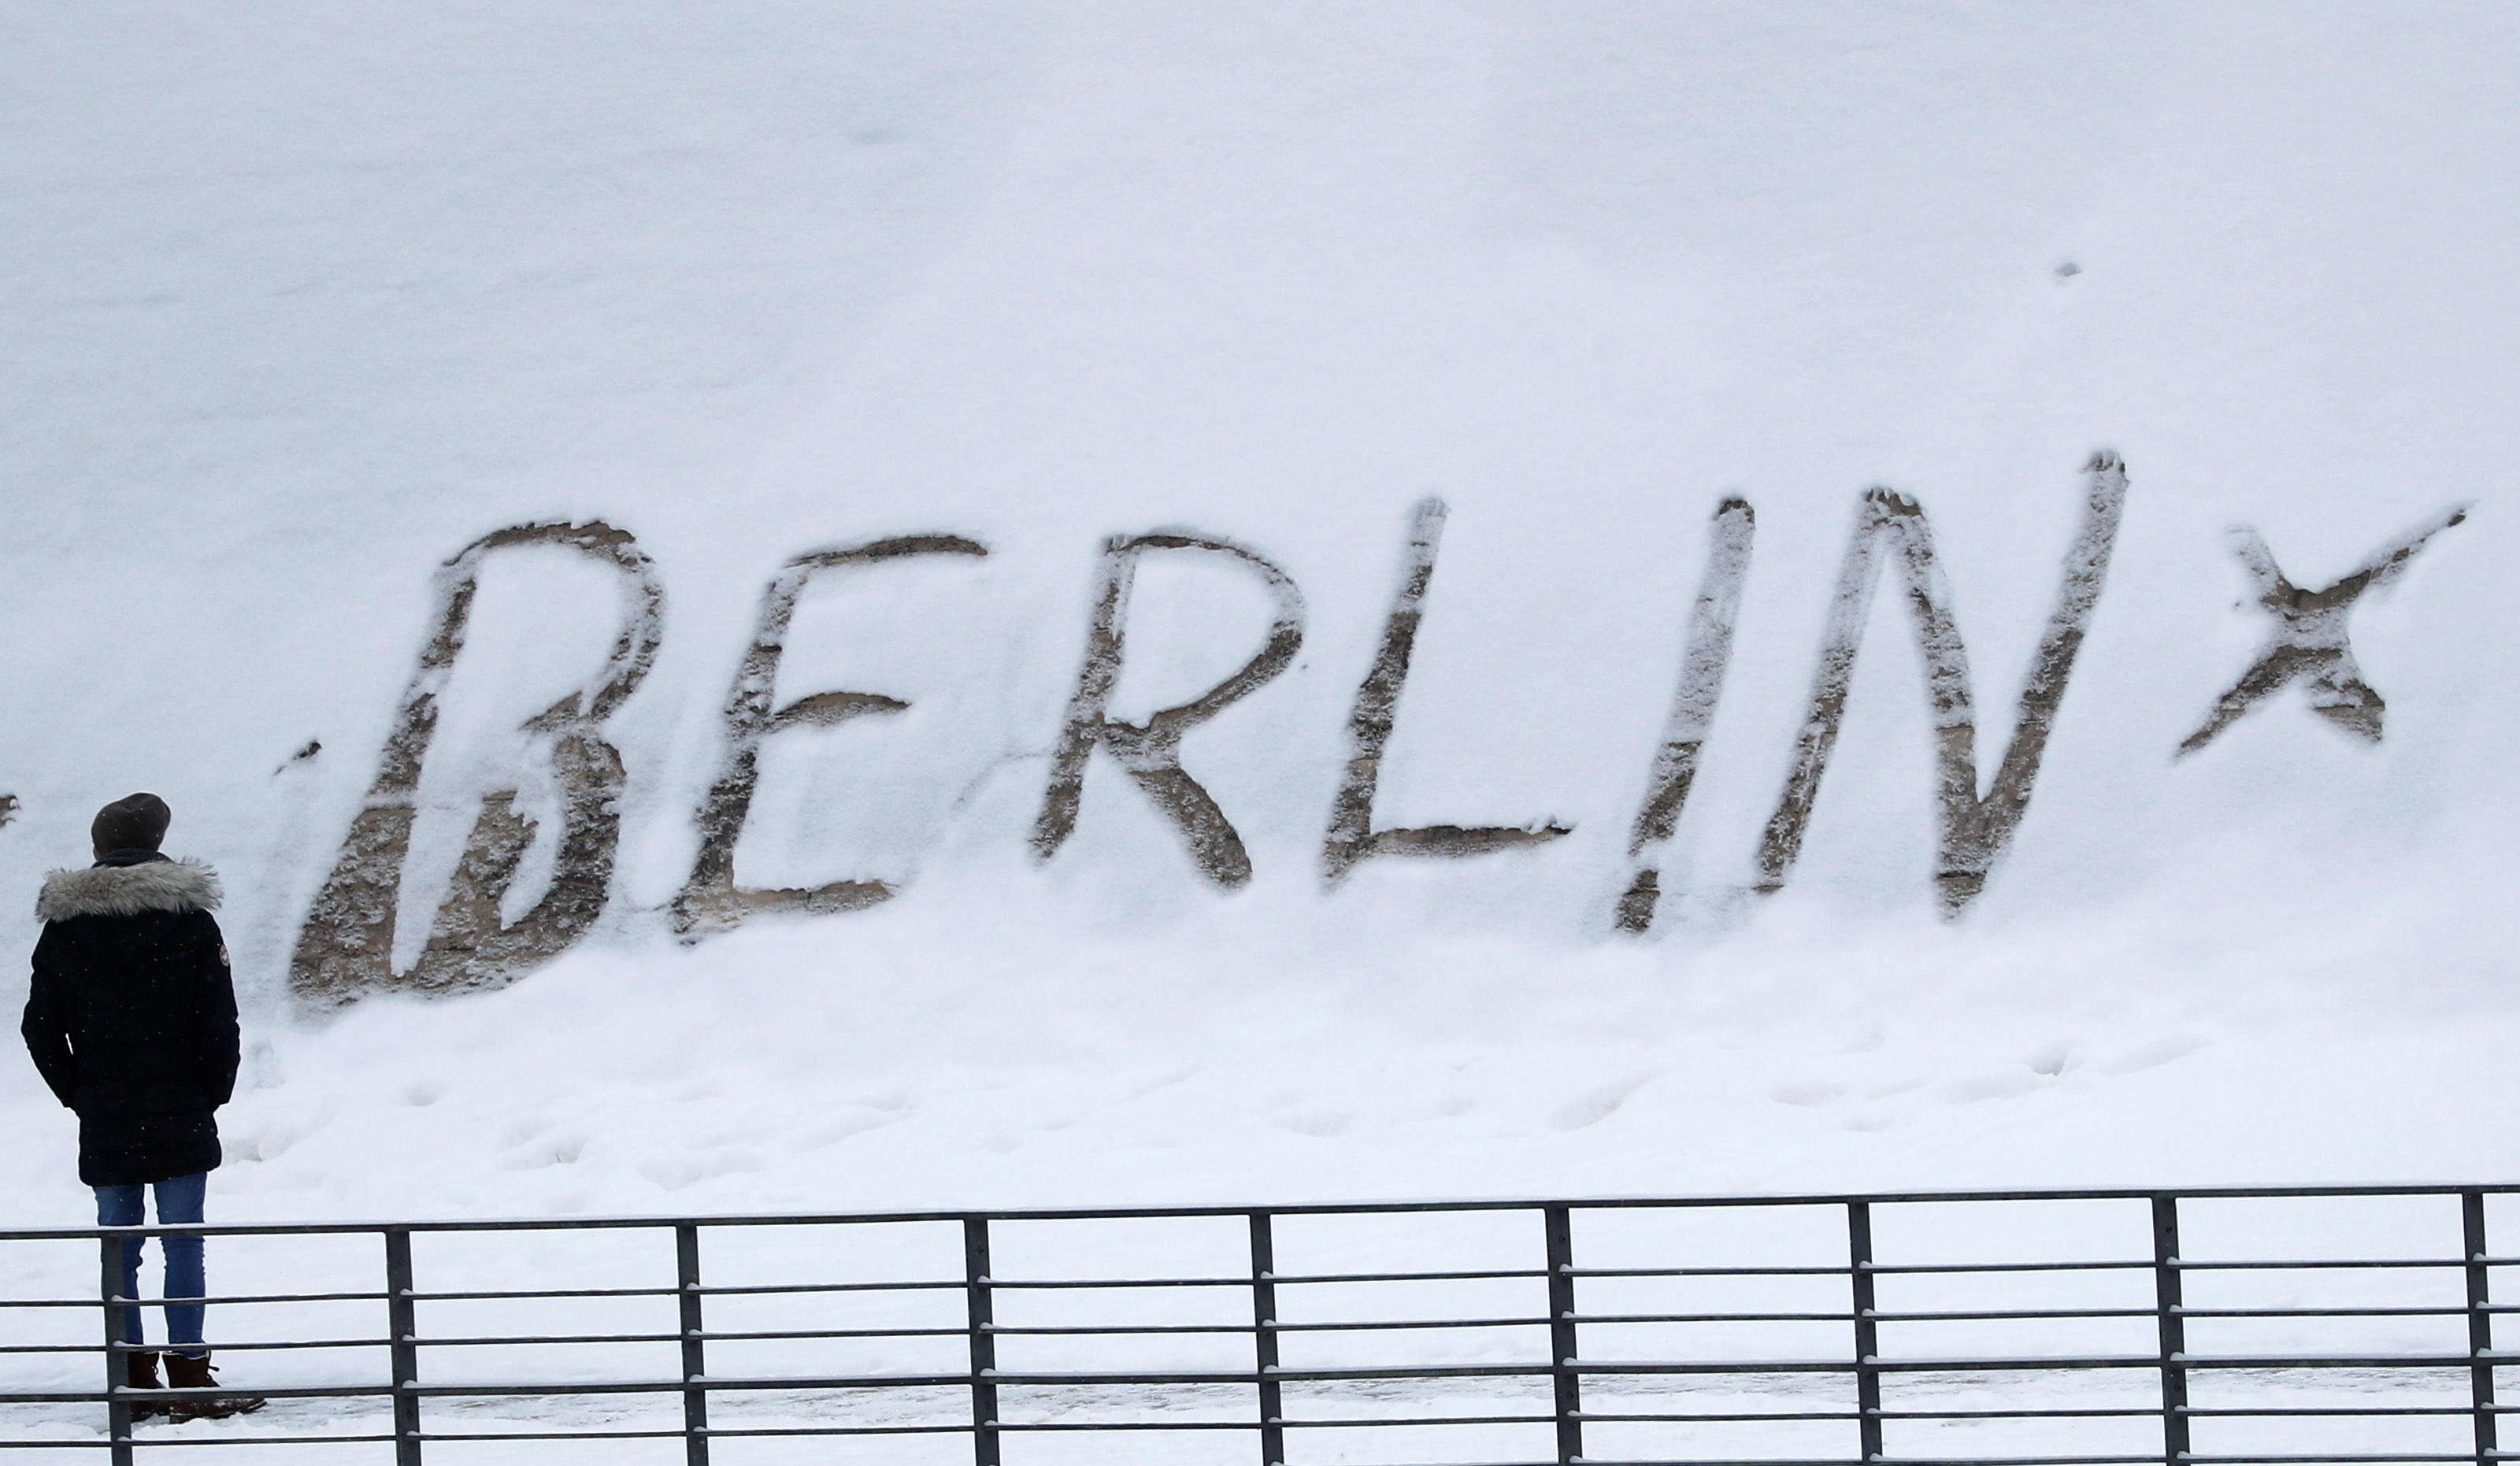 Snow hits transport in Germany's coldest February in almost a decade